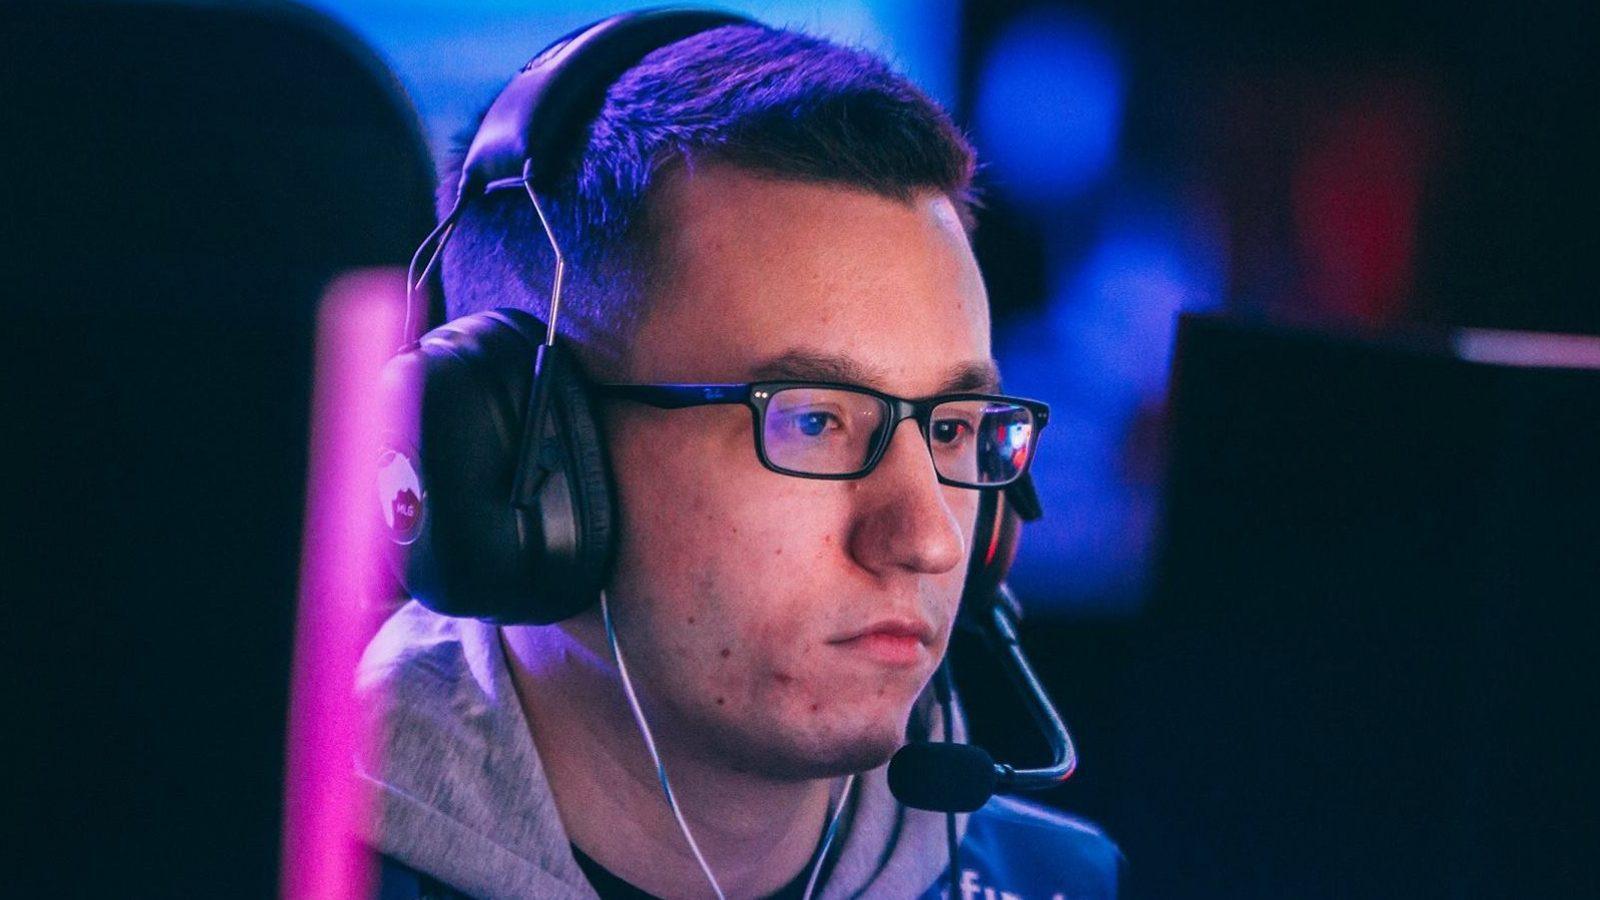 Aches playing Call of Duty.